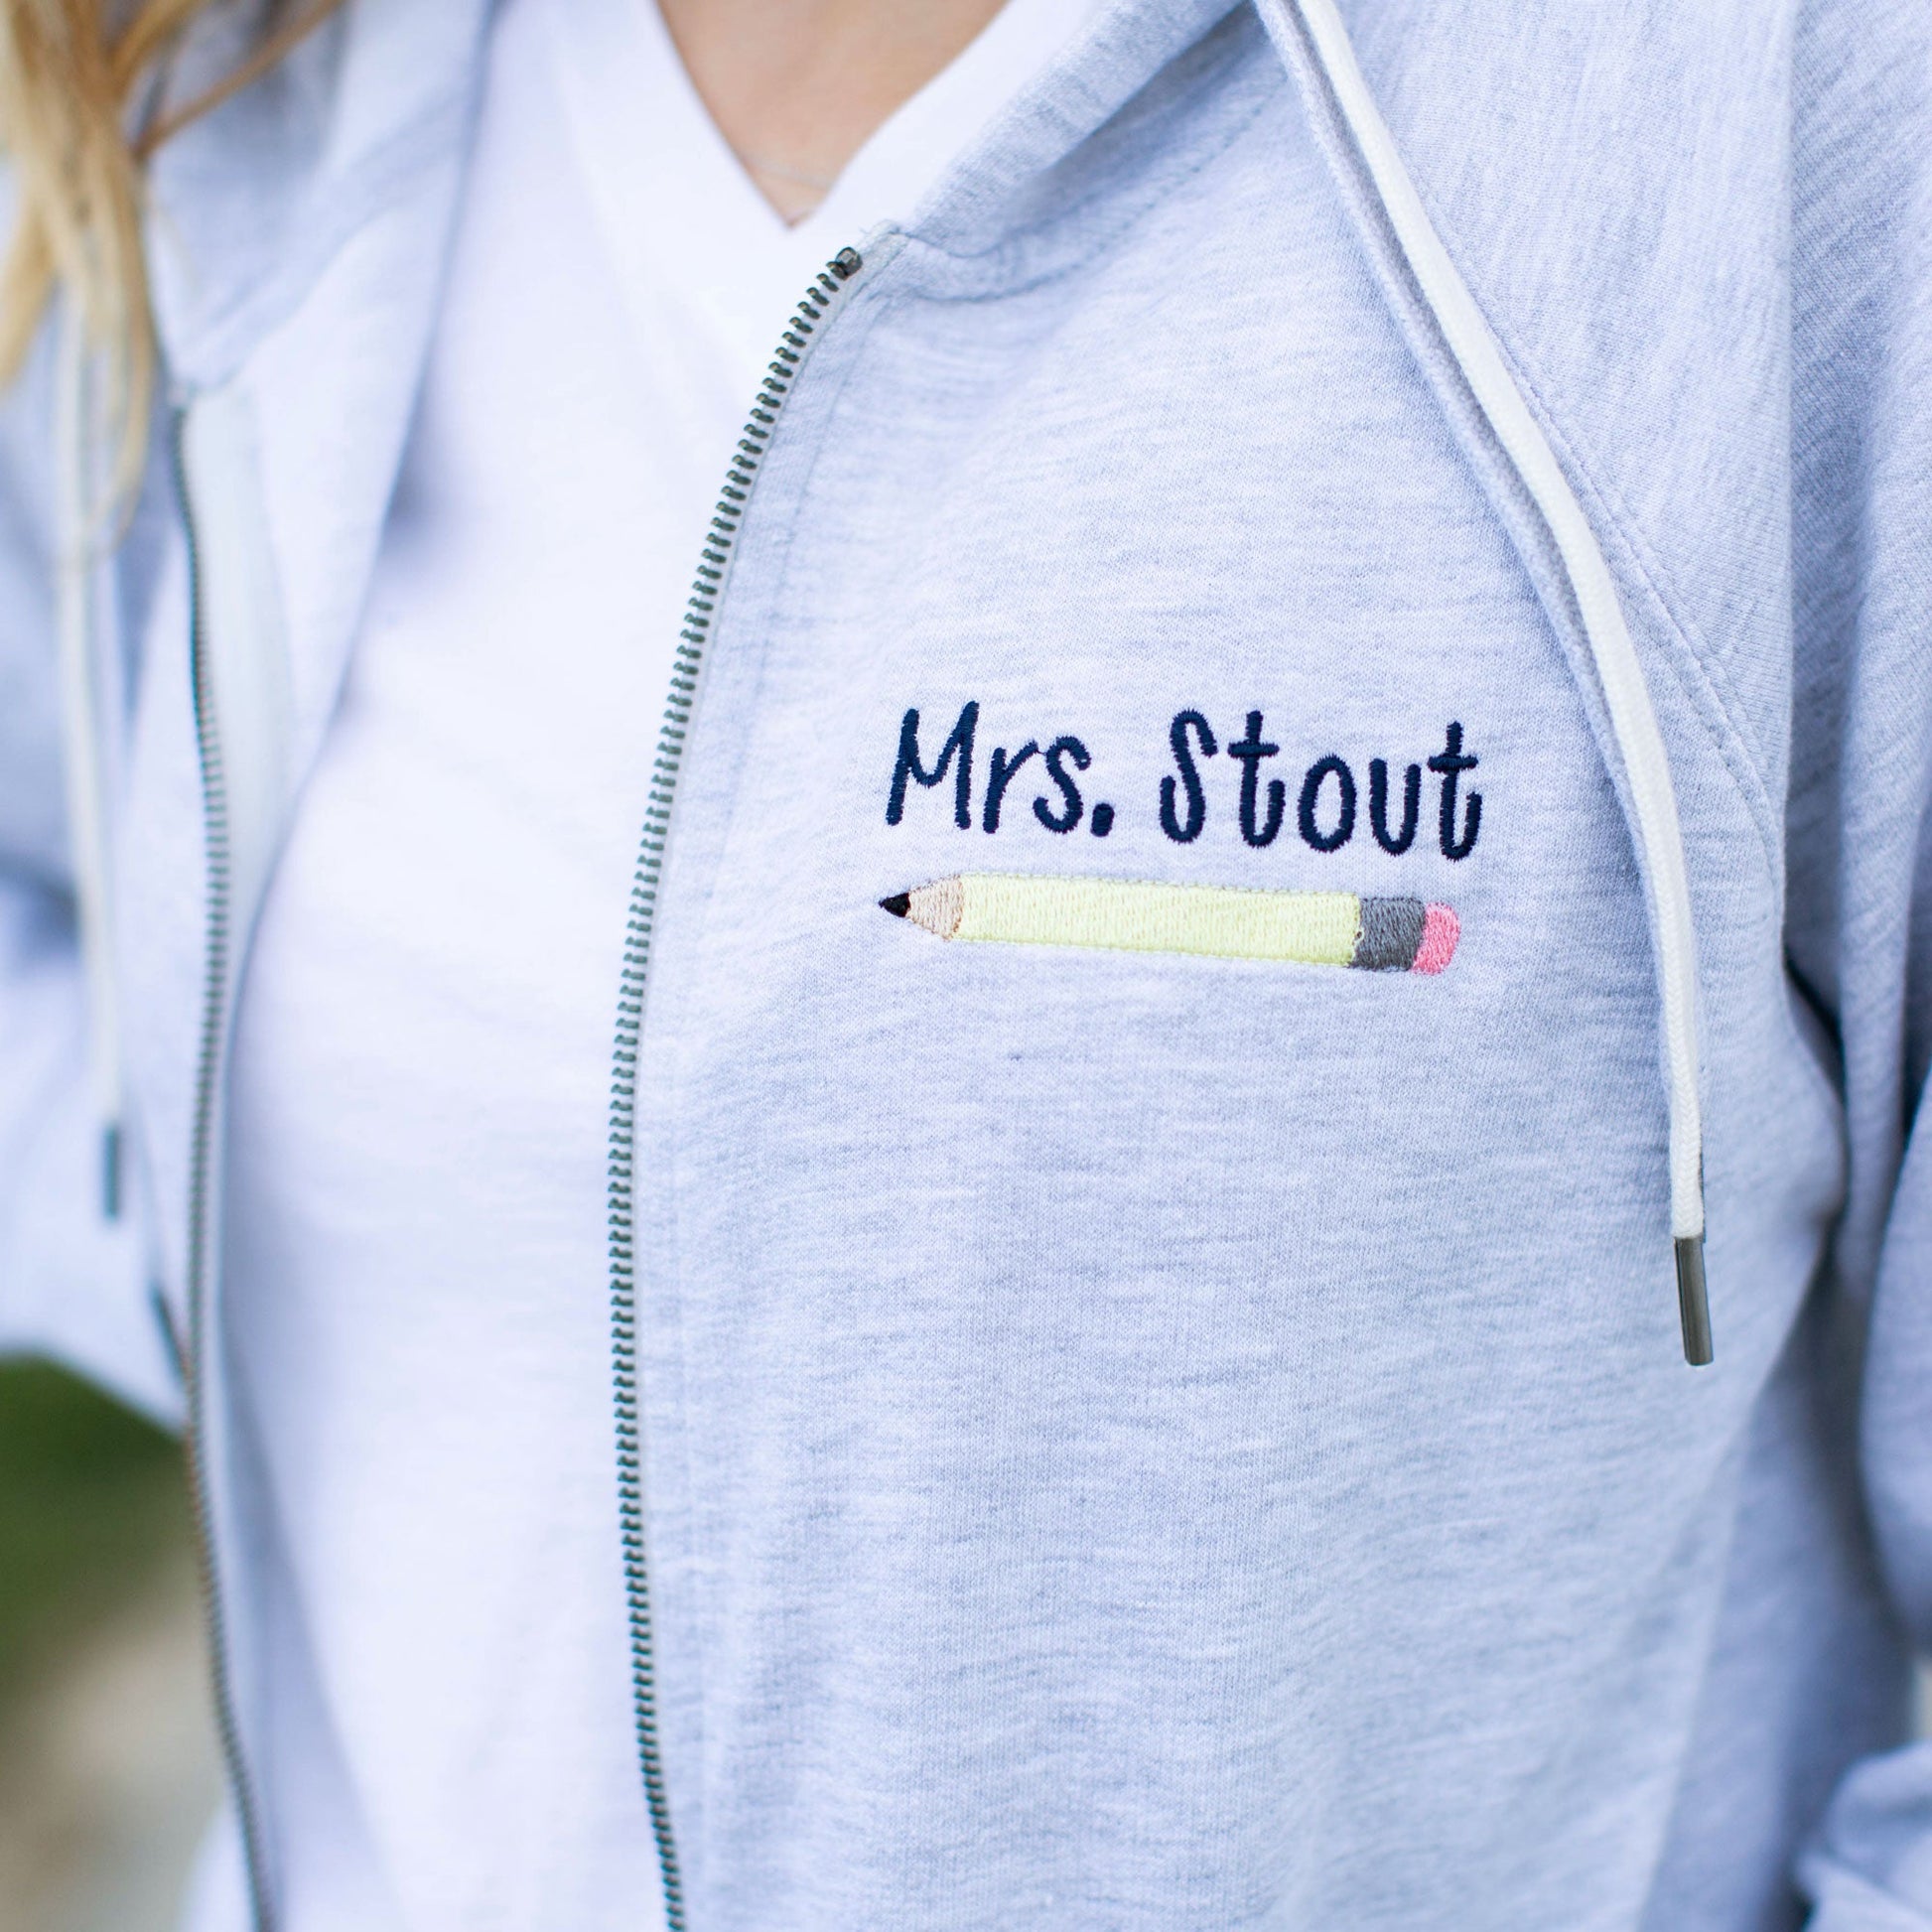 close up of educator's name and pencil embroidered on a grey zippered jacket with white and grey double string